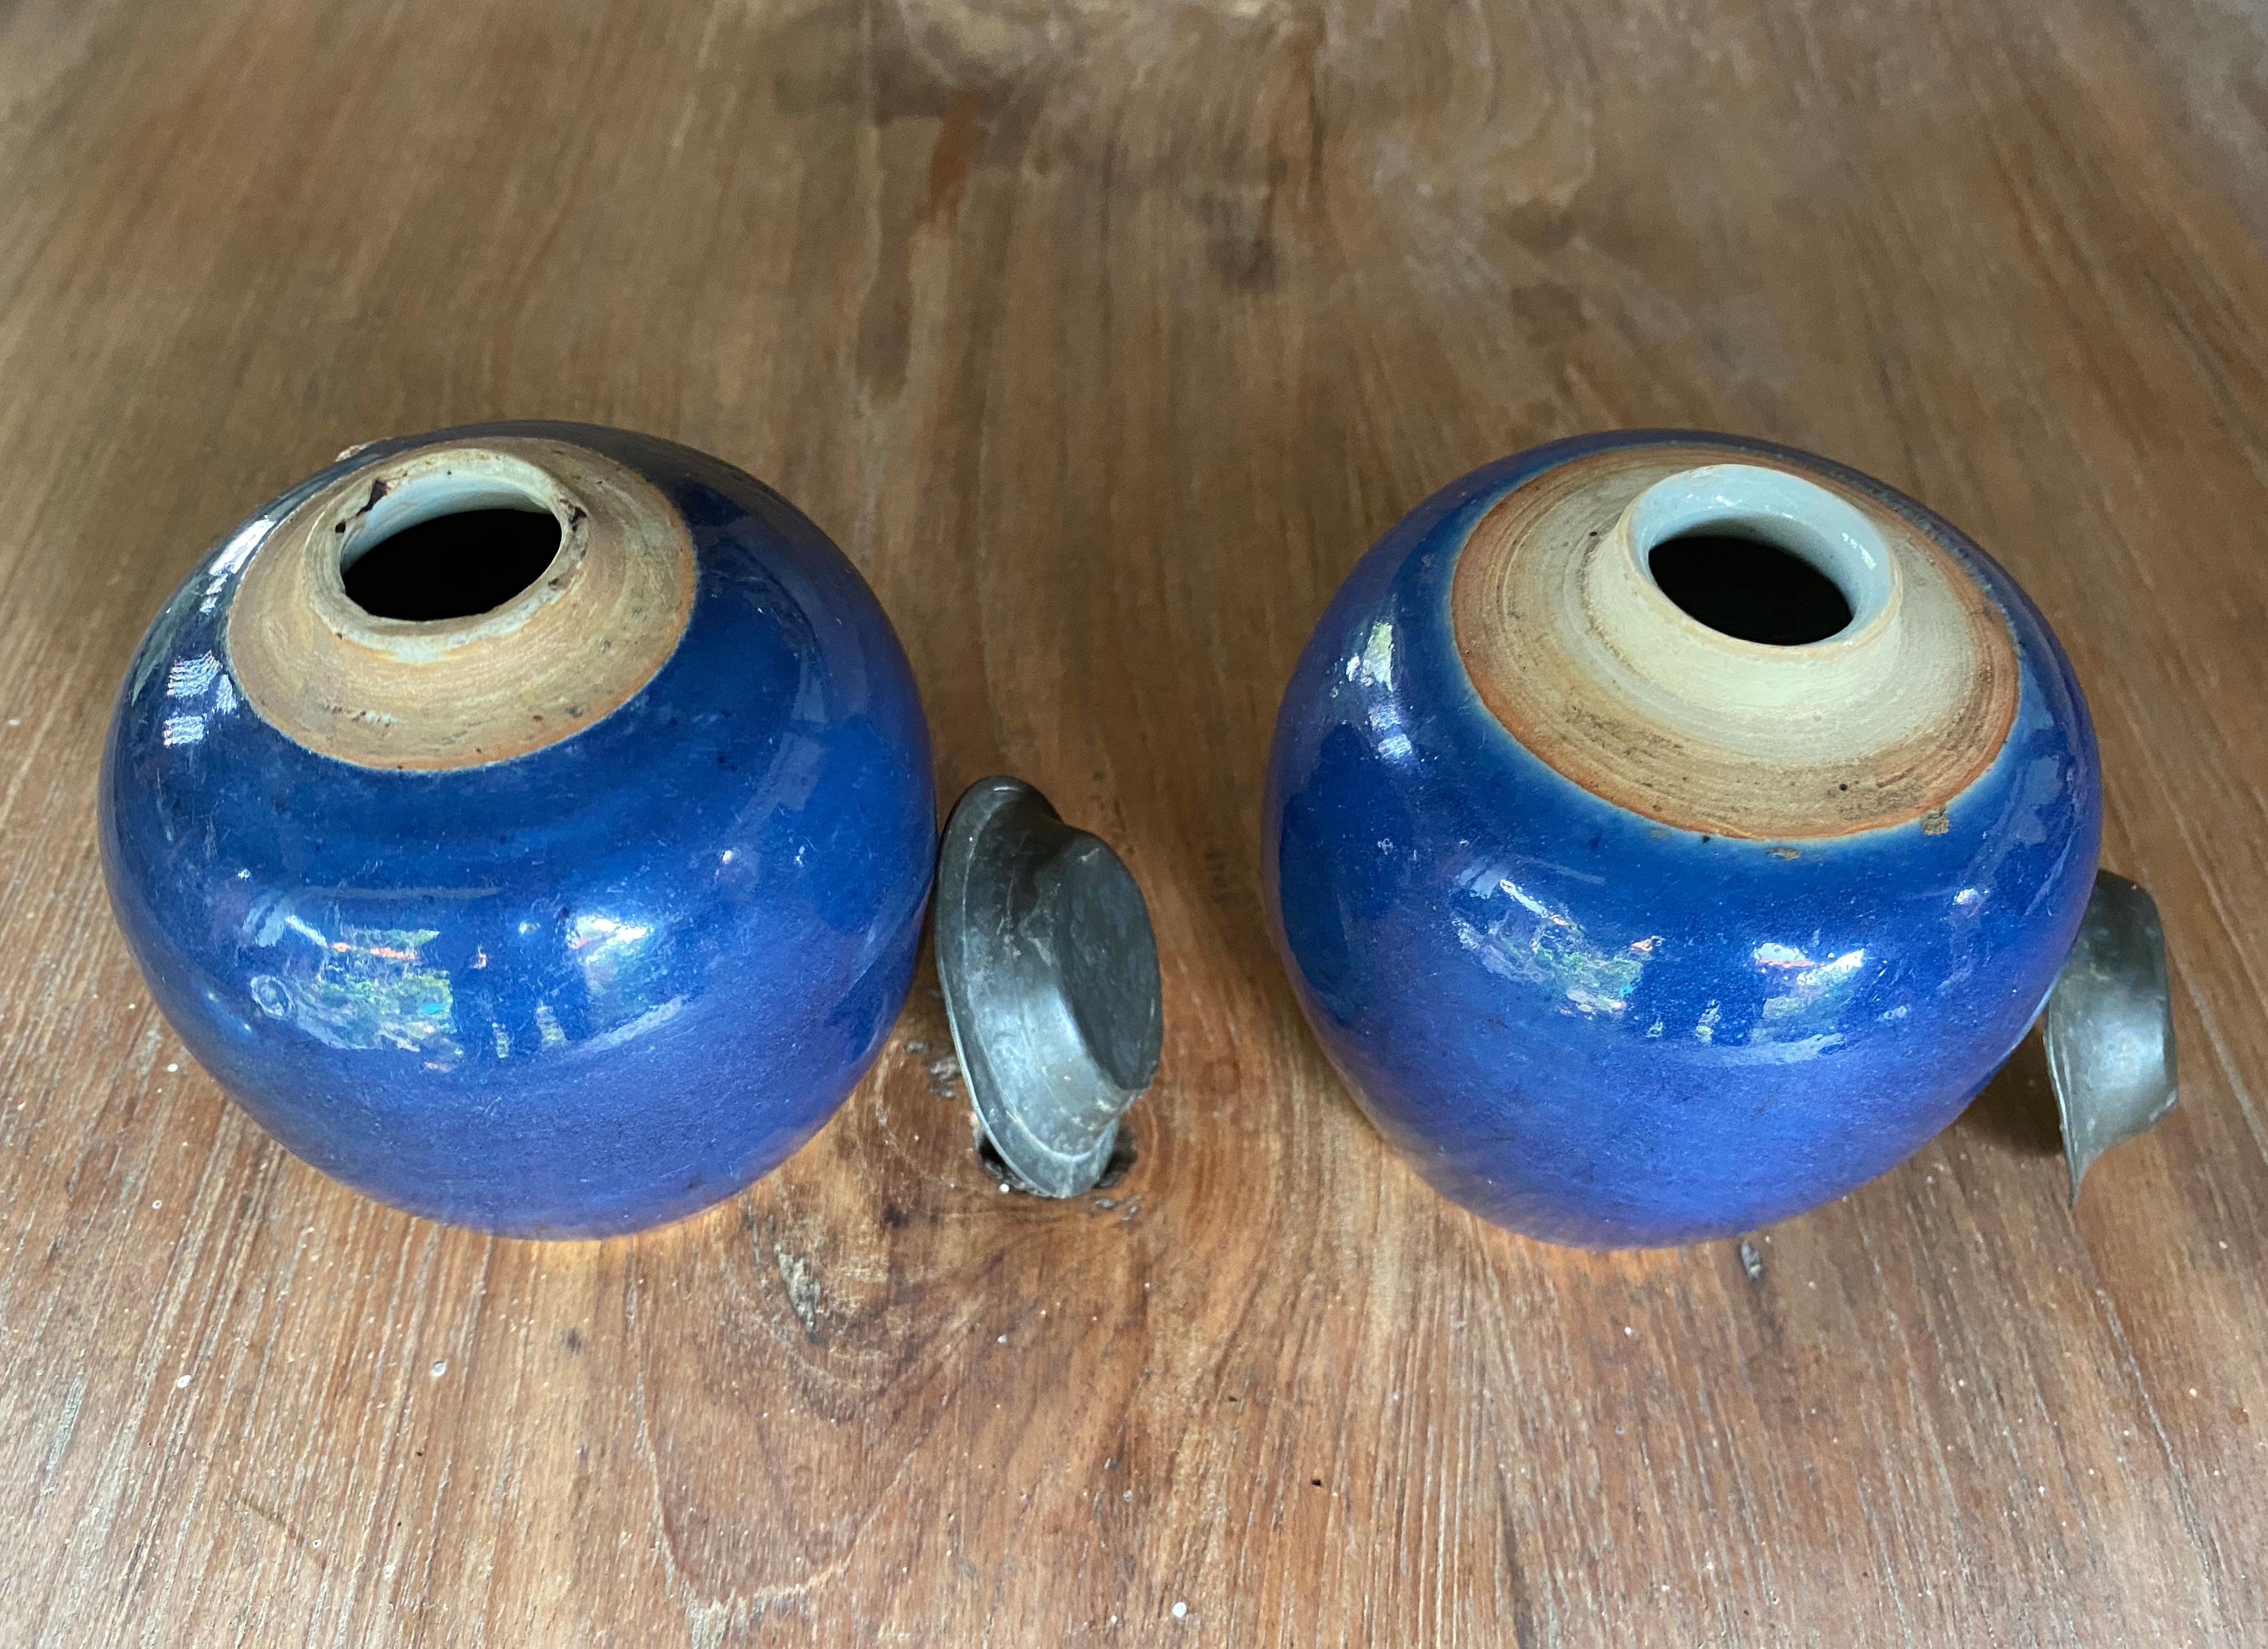 Glazed Pair of Small Blue Chinese Ceramic Ginger Jars, Early 20th Century